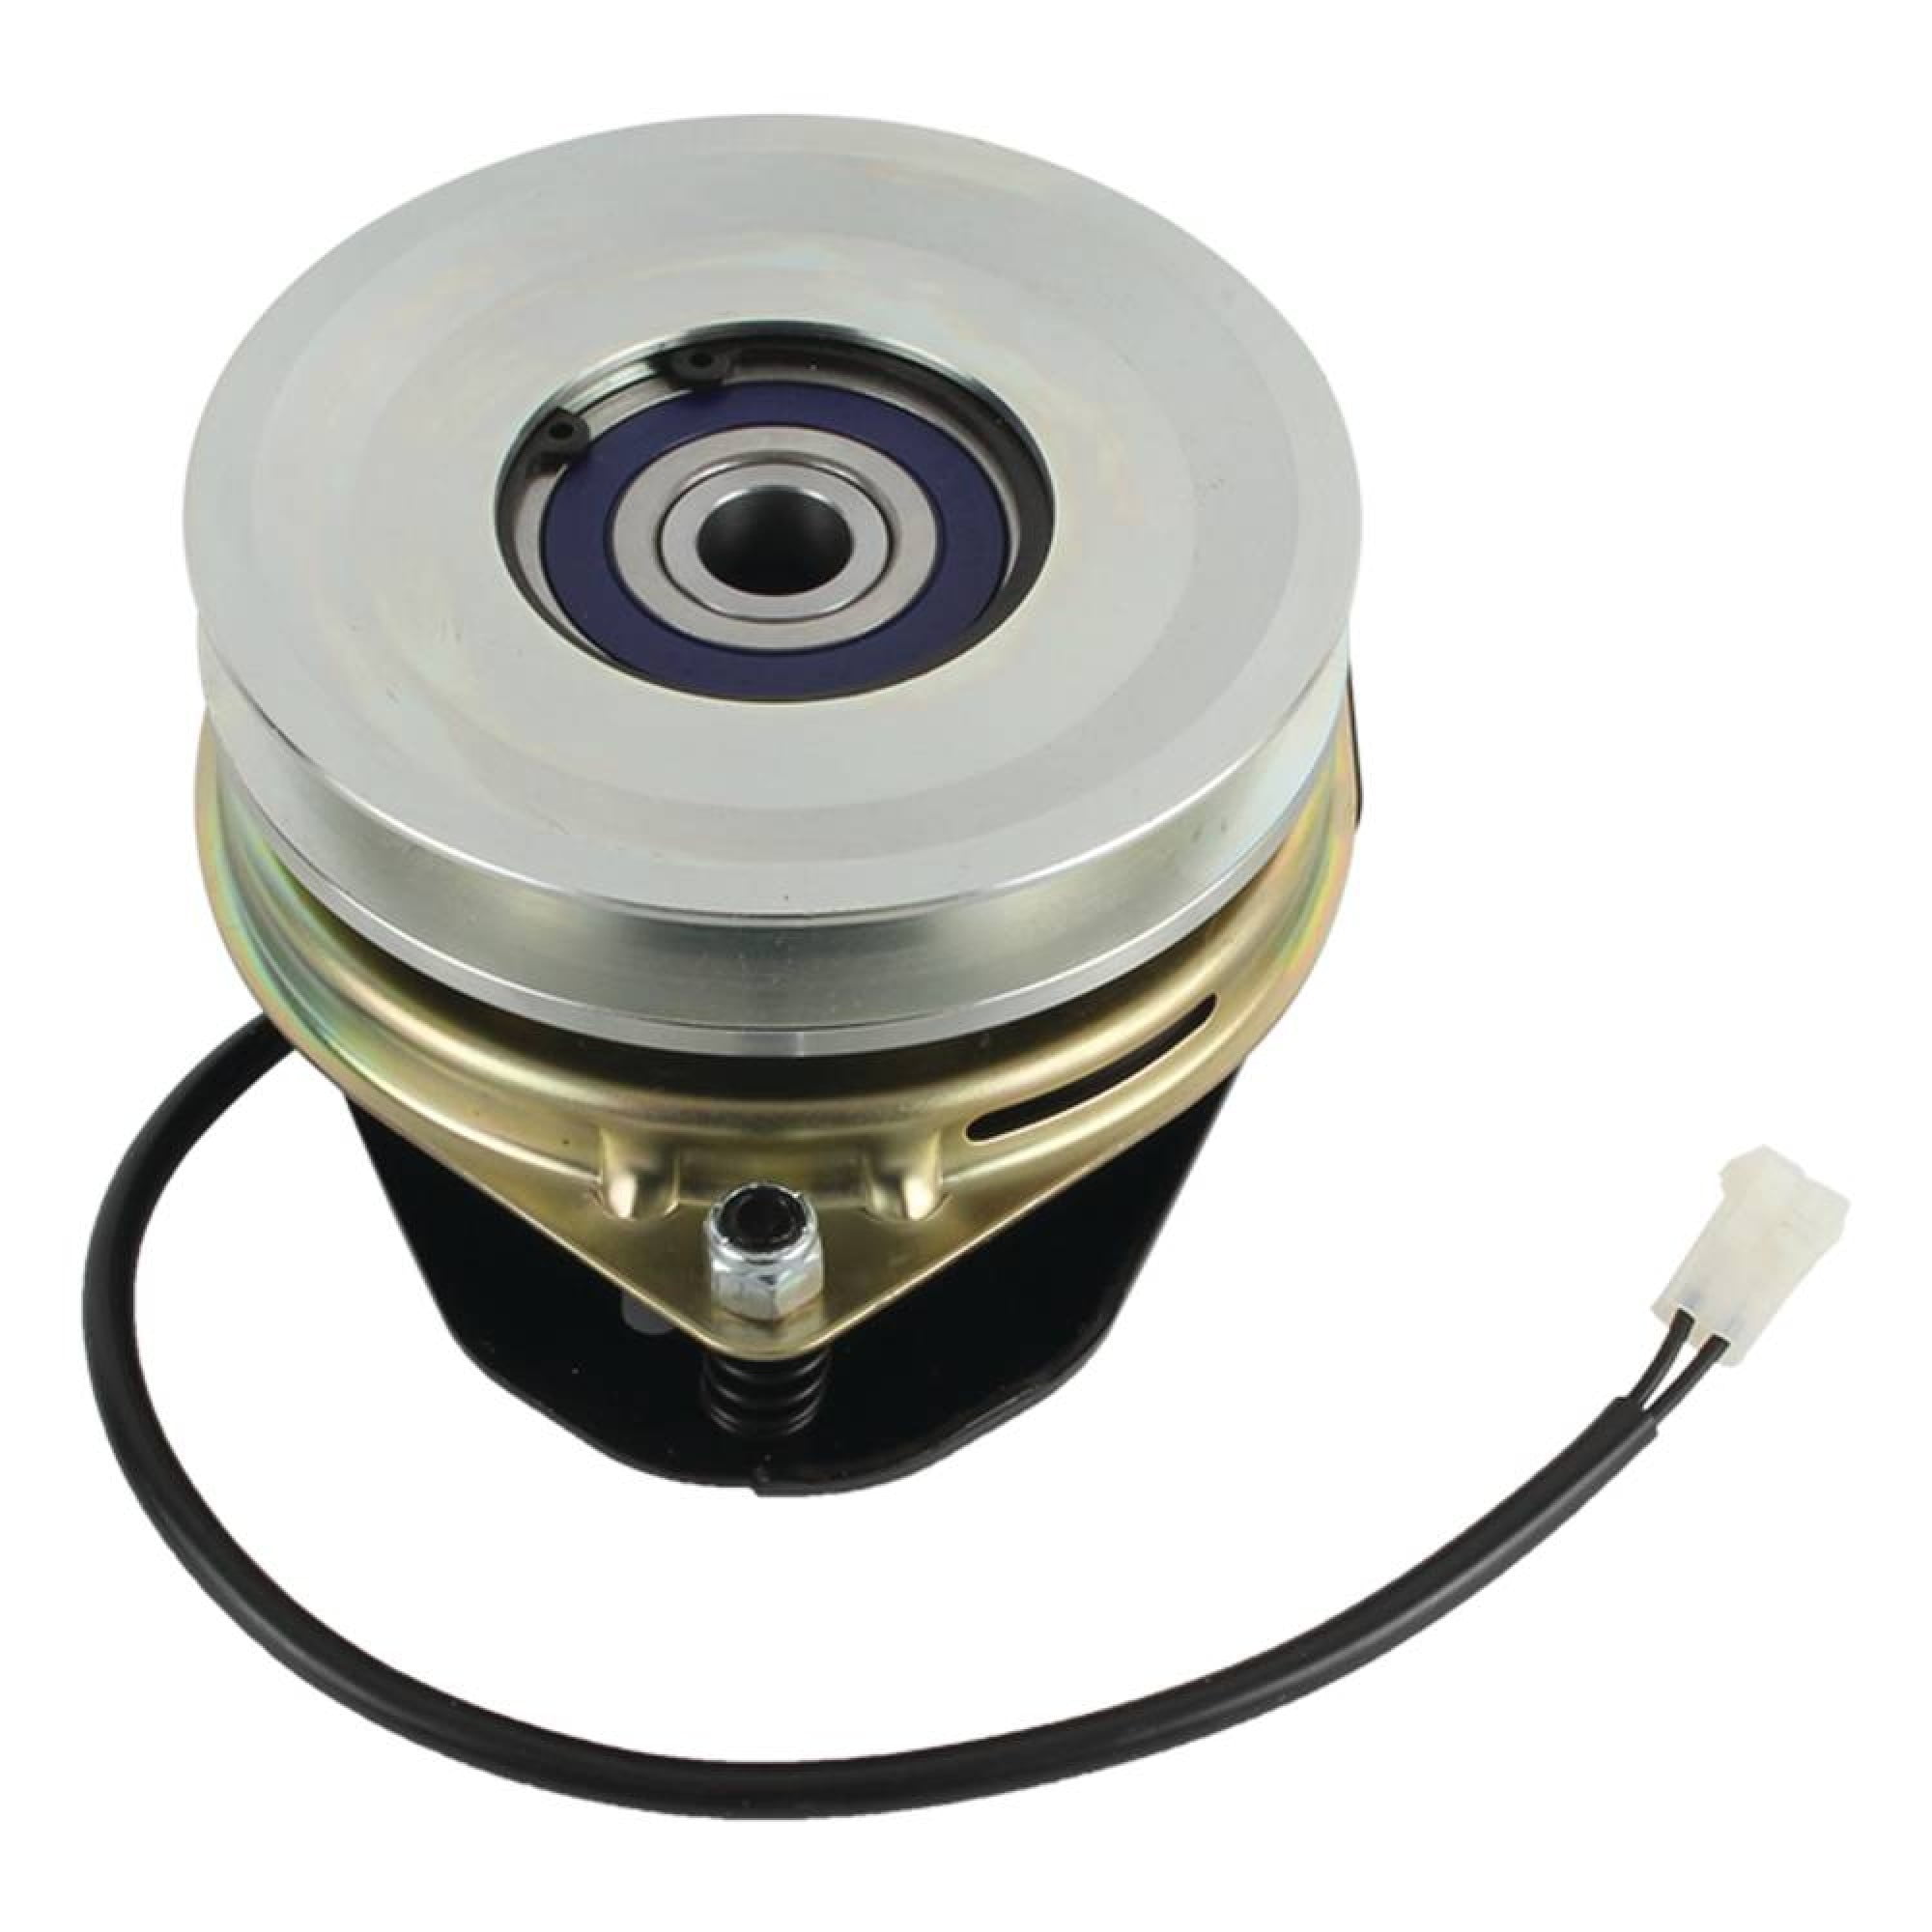 Husqvarna 587241401 Lawn Tractor Electric Clutch for sale online 